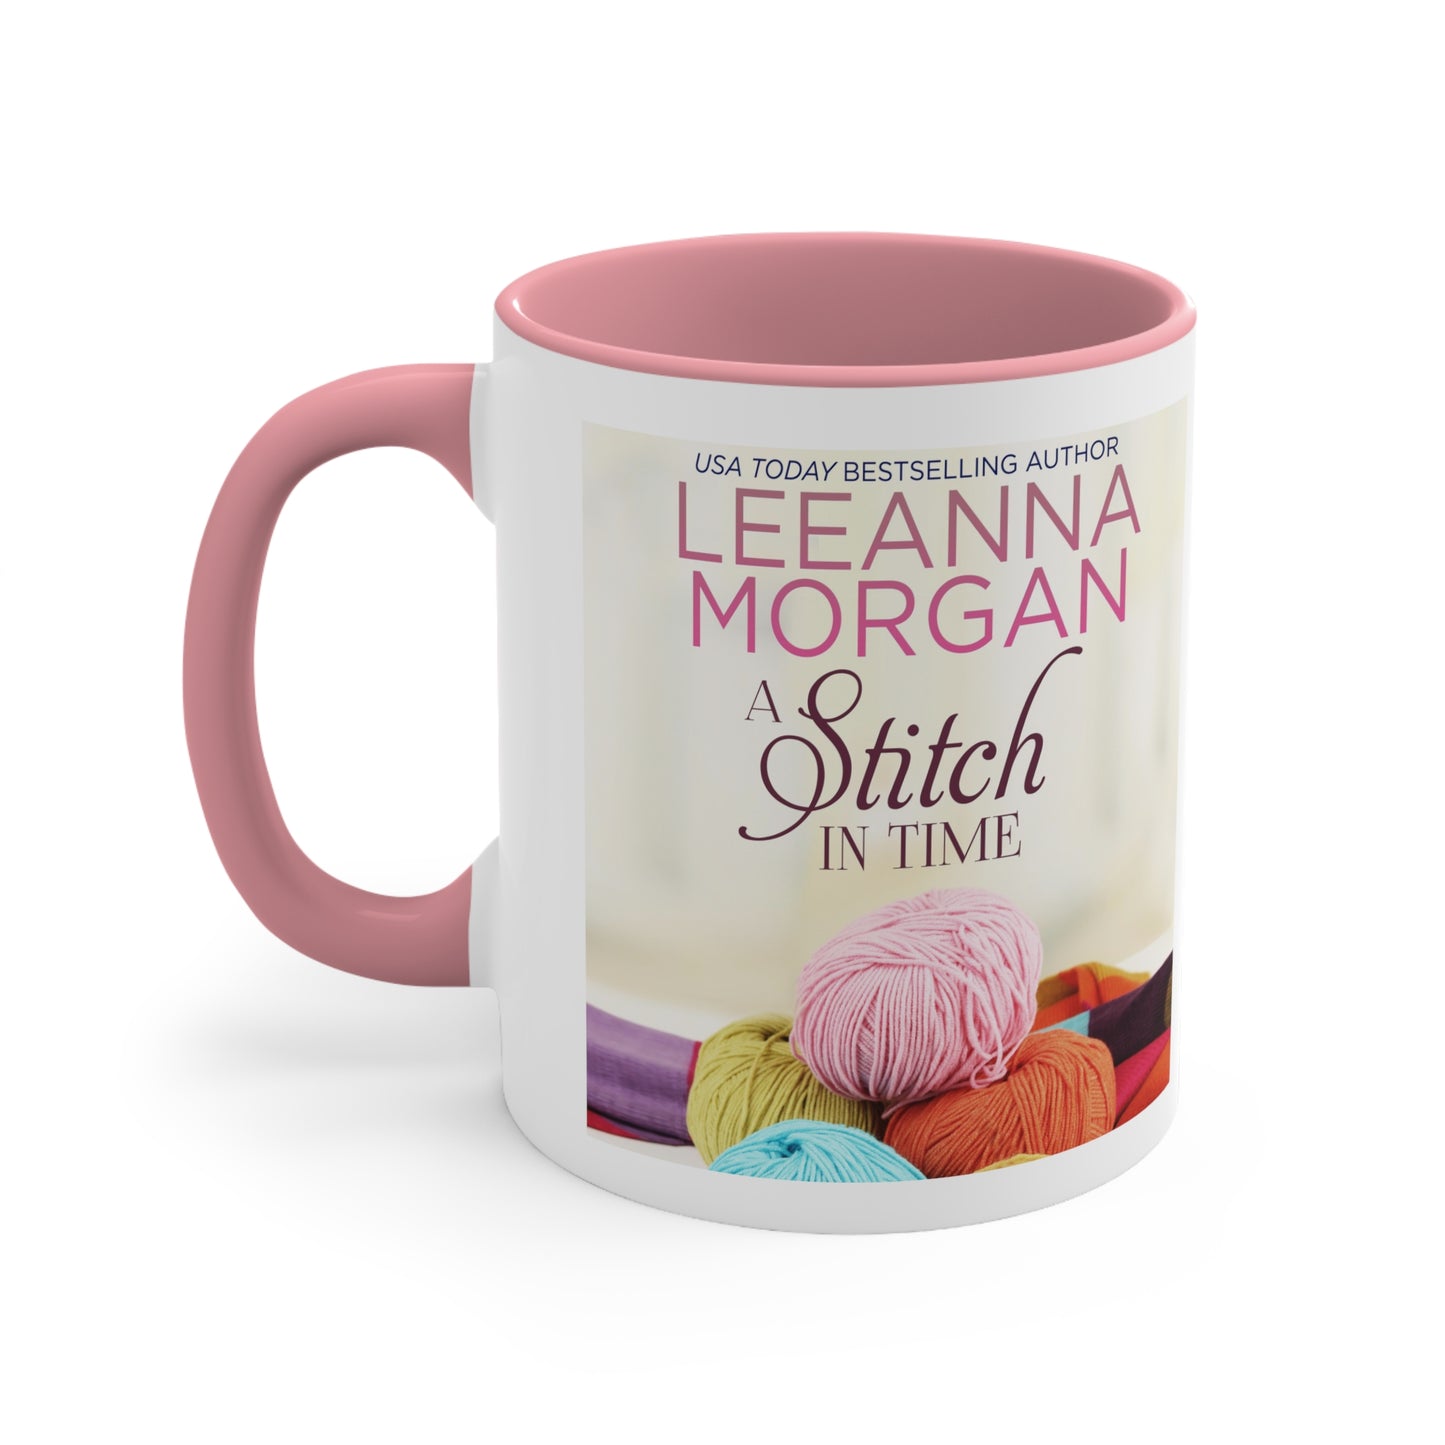 A Stitch in Time Coffee Mug - Love is the thread that ties us together